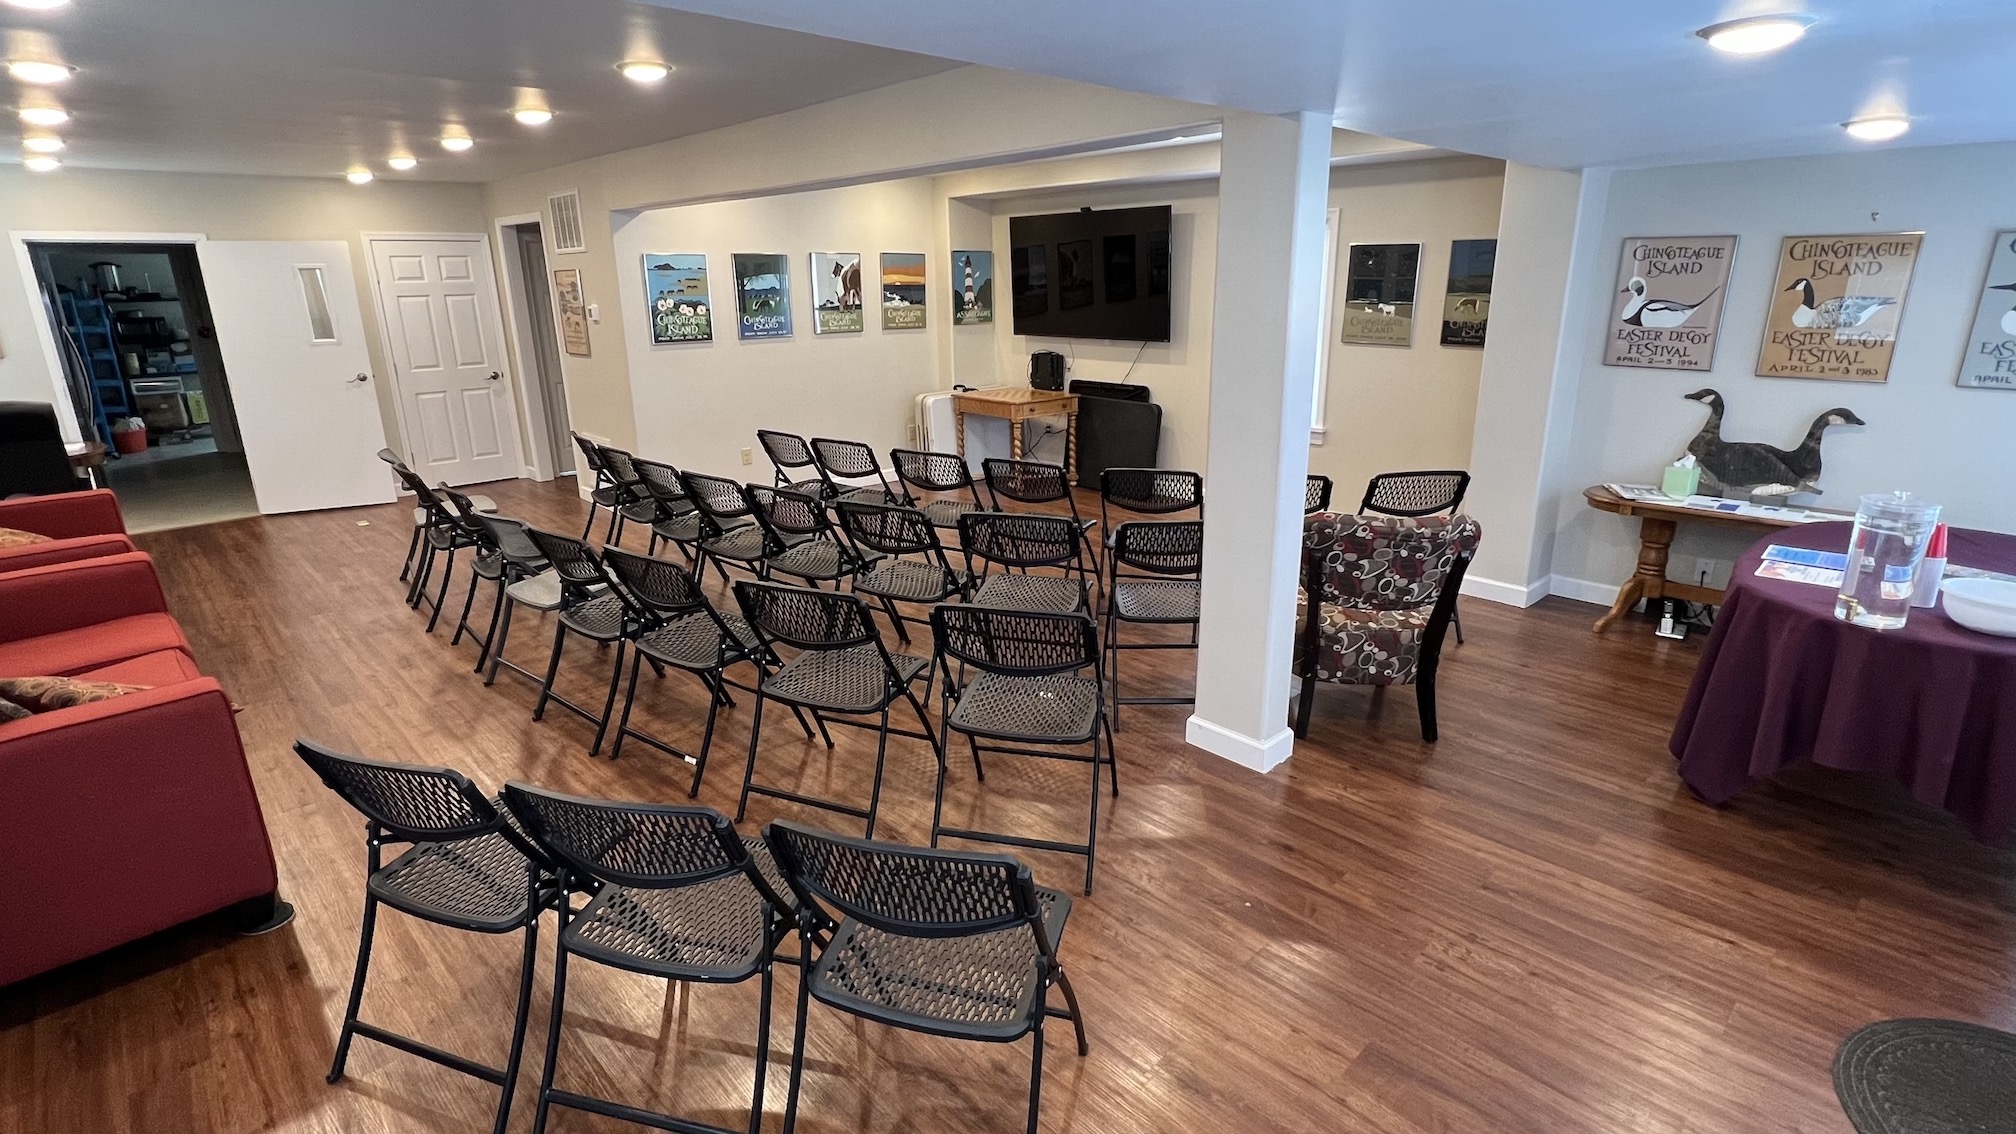 The main meeting room of the Island Community House.